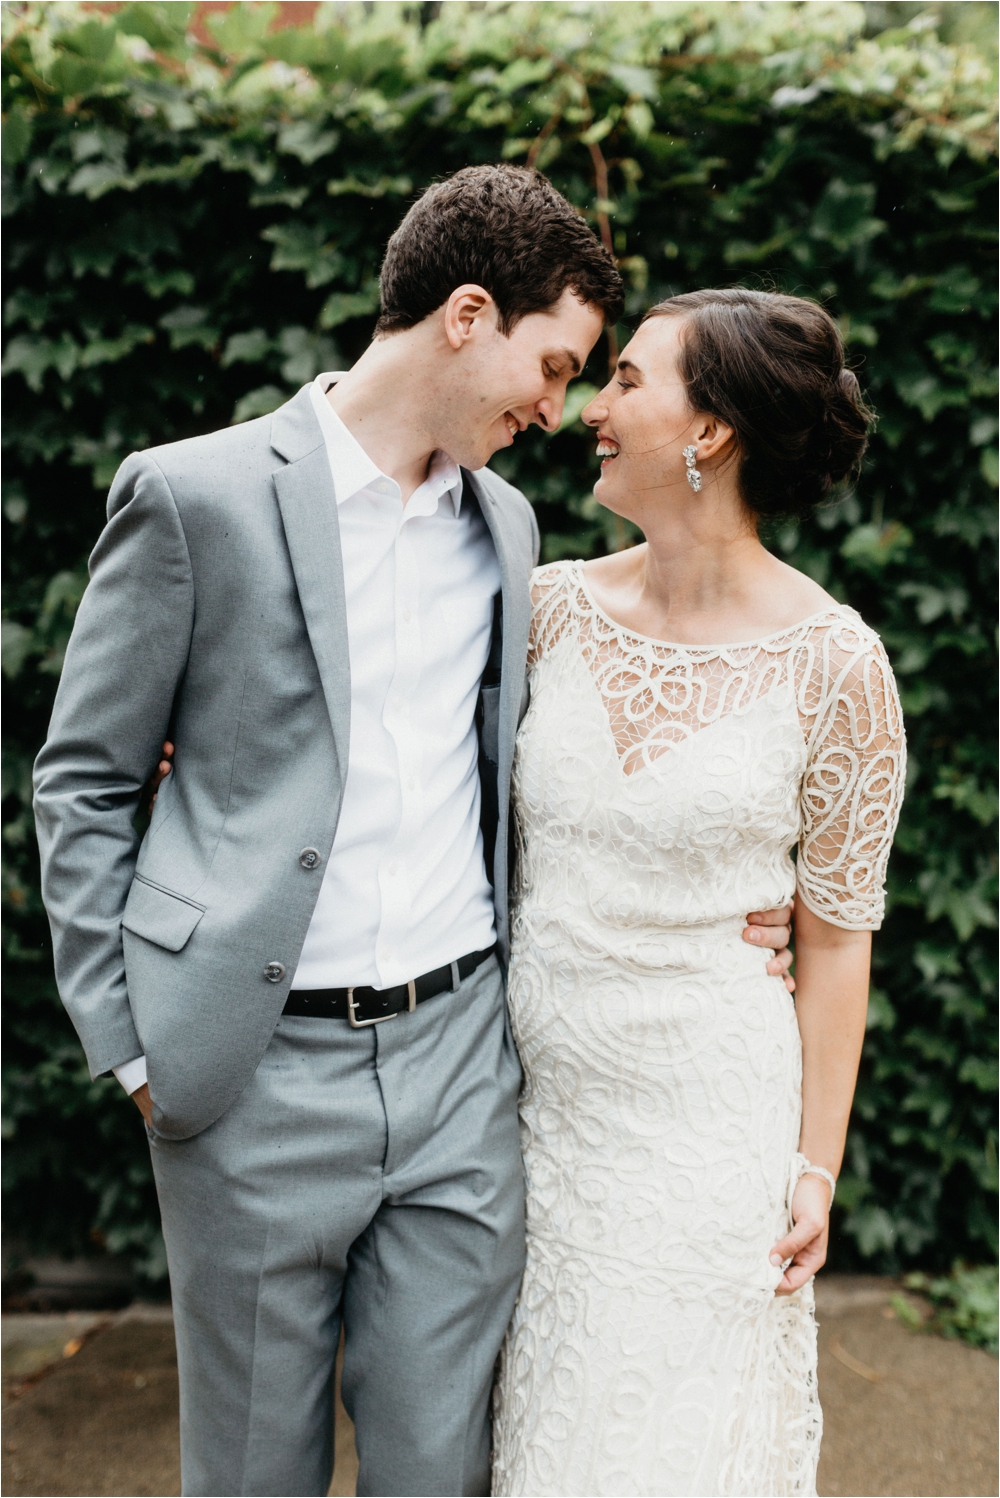 Bride and groom portrait | Shaw Photo Co.